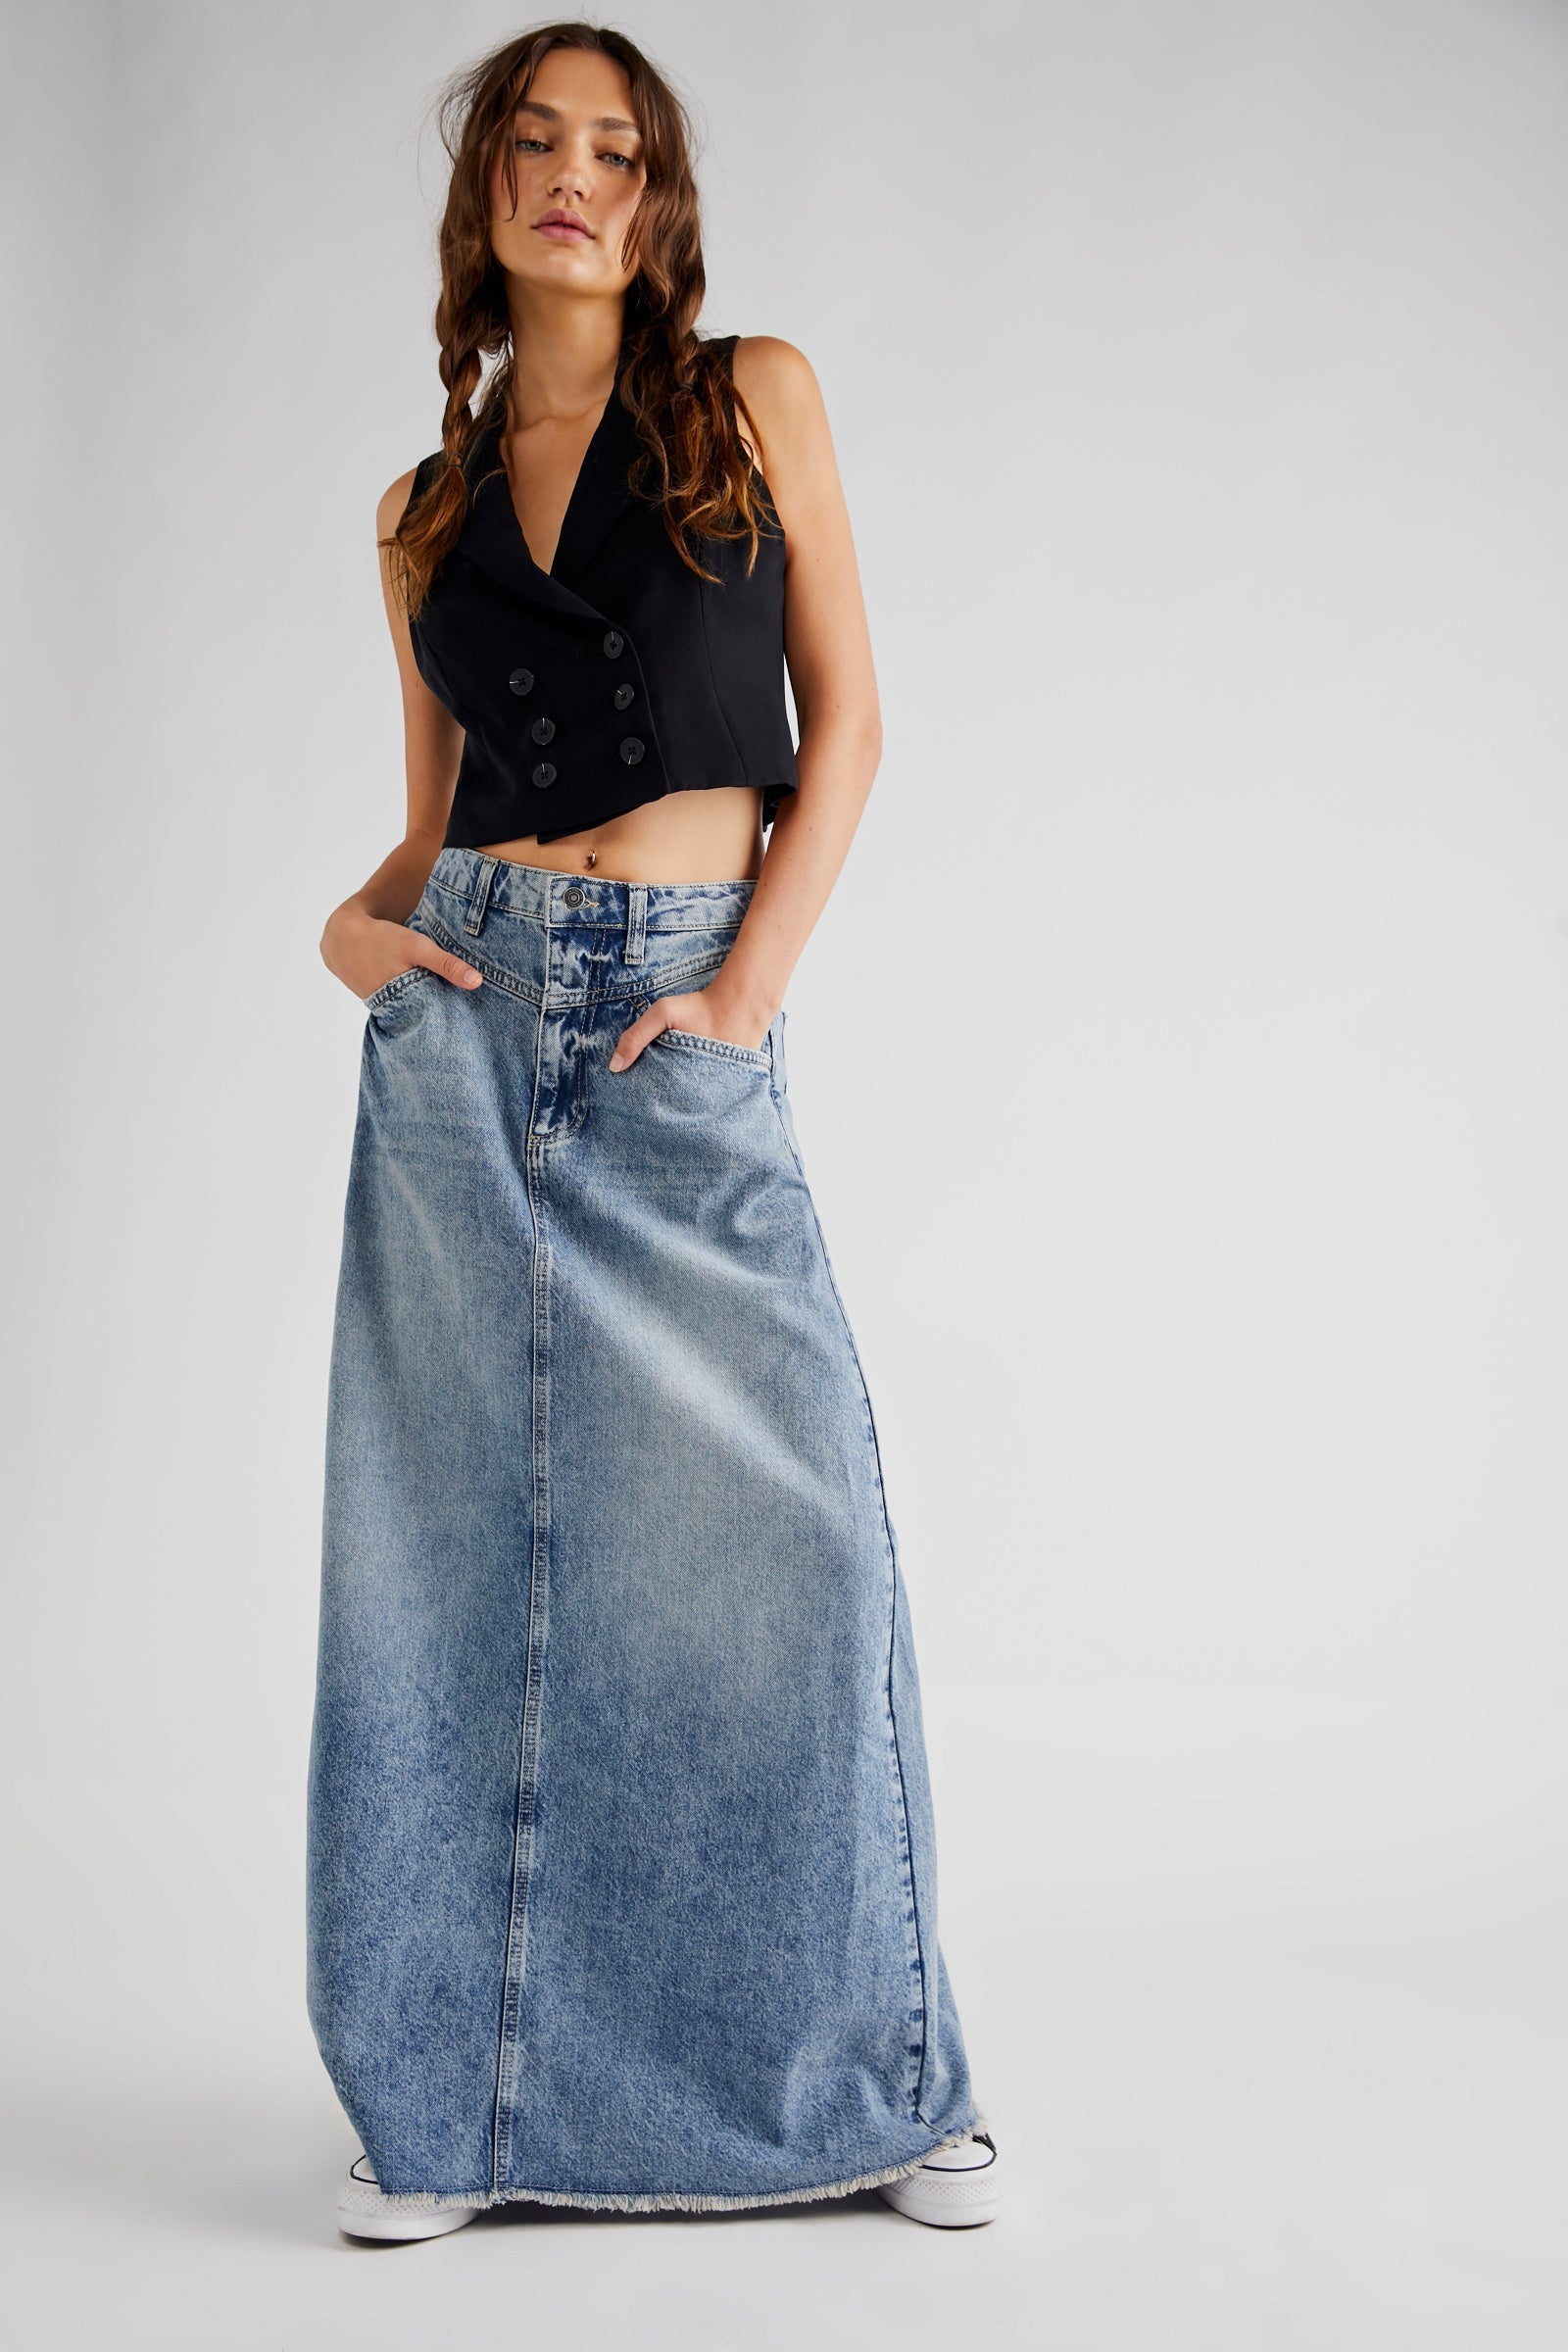 Come As You Are Denim Skirt In Med Indigo